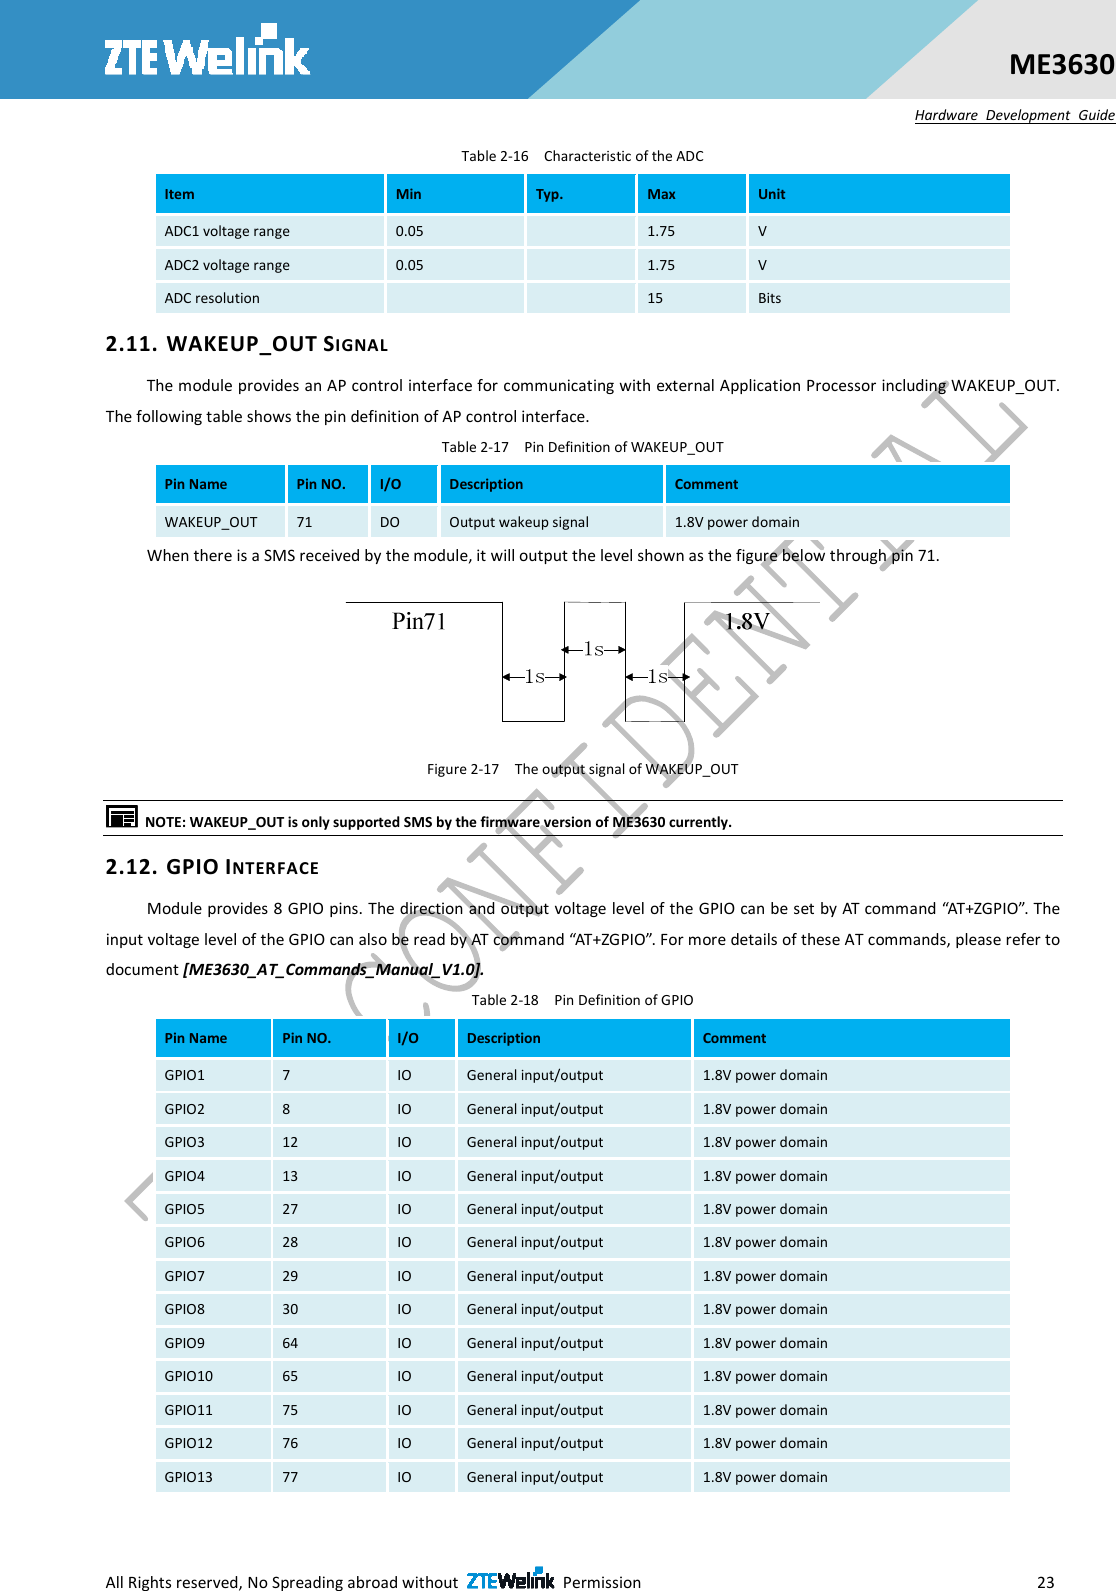  All Rights reserved, No Spreading abroad without    Permission                        23 ME3630 Hardware  Development  Guide Table 2-16    Characteristic of the ADC Item  Min  Typ.  Max  Unit ADC1 voltage range  0.05    1.75  V ADC2 voltage range  0.05    1.75  V ADC resolution      15  Bits 2.11. WAKEUP_OUT SIGNAL The module provides an AP control interface for communicating with external Application Processor including WAKEUP_OUT. The following table shows the pin definition of AP control interface. Table 2-17    Pin Definition of WAKEUP_OUT Pin Name  Pin NO.  I/O  Description  Comment WAKEUP_OUT  71  DO  Output wakeup signal    1.8V power domain When there is a SMS received by the module, it will output the level shown as the figure below through pin 71.  Figure 2-17    The output signal of WAKEUP_OUT   NOTE: WAKEUP_OUT is only supported SMS by the firmware version of ME3630 currently. 2.12. GPIO INTERFACE Module provides 8 GPIO pins. The direction and output voltage level of the GPIO can be set by AT command “AT+ZGPIO”. The input voltage level of the GPIO can also be read by AT command “AT+ZGPIO”. For more details of these AT commands, please refer to document [ME3630_AT_Commands_Manual_V1.0]. Table 2-18    Pin Definition of GPIO Pin Name  Pin NO.  I/O  Description  Comment GPIO1  7  IO  General input/output  1.8V power domain GPIO2  8  IO  General input/output  1.8V power domain GPIO3  12  IO  General input/output  1.8V power domain GPIO4  13  IO  General input/output  1.8V power domain GPIO5  27  IO  General input/output  1.8V power domain GPIO6  28  IO  General input/output  1.8V power domain GPIO7  29  IO  General input/output  1.8V power domain GPIO8  30  IO  General input/output  1.8V power domain GPIO9  64  IO  General input/output  1.8V power domain GPIO10  65  IO  General input/output  1.8V power domain GPIO11  75  IO  General input/output  1.8V power domain GPIO12  76  IO  General input/output  1.8V power domain GPIO13  77  IO  General input/output  1.8V power domain 